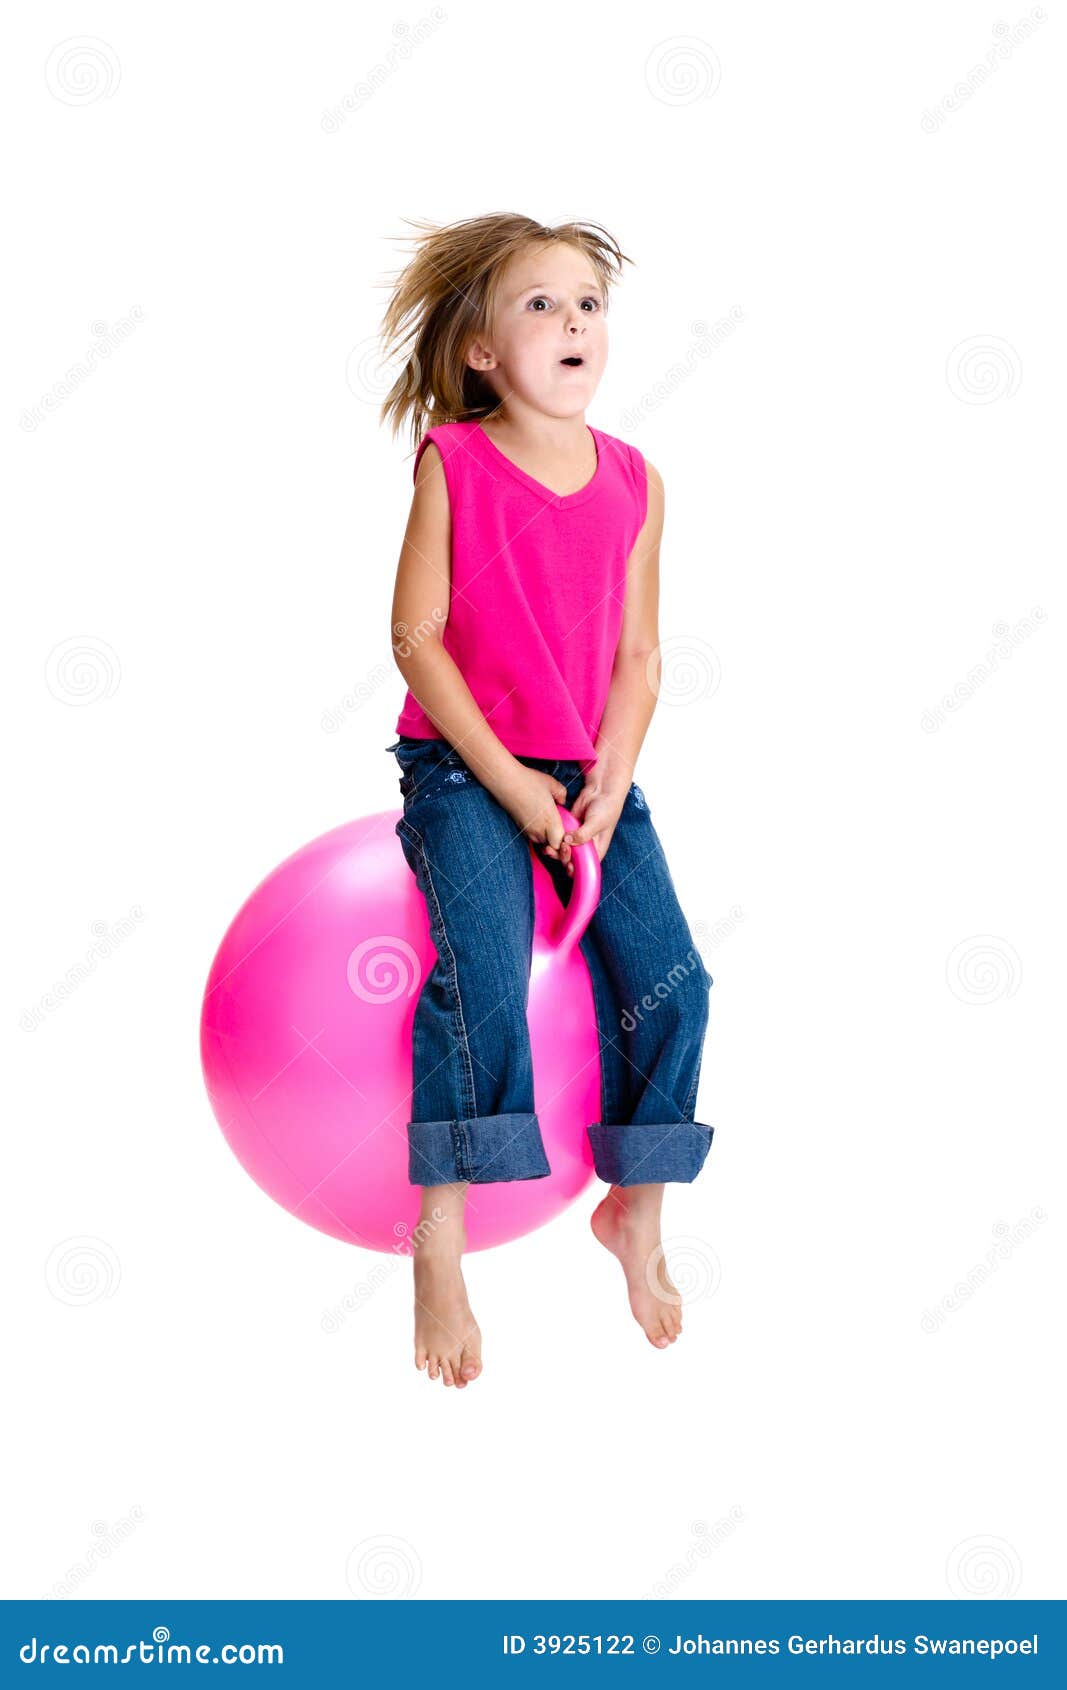 Bouncing Woman Images – Browse 15,861 Stock Photos, Vectors, and